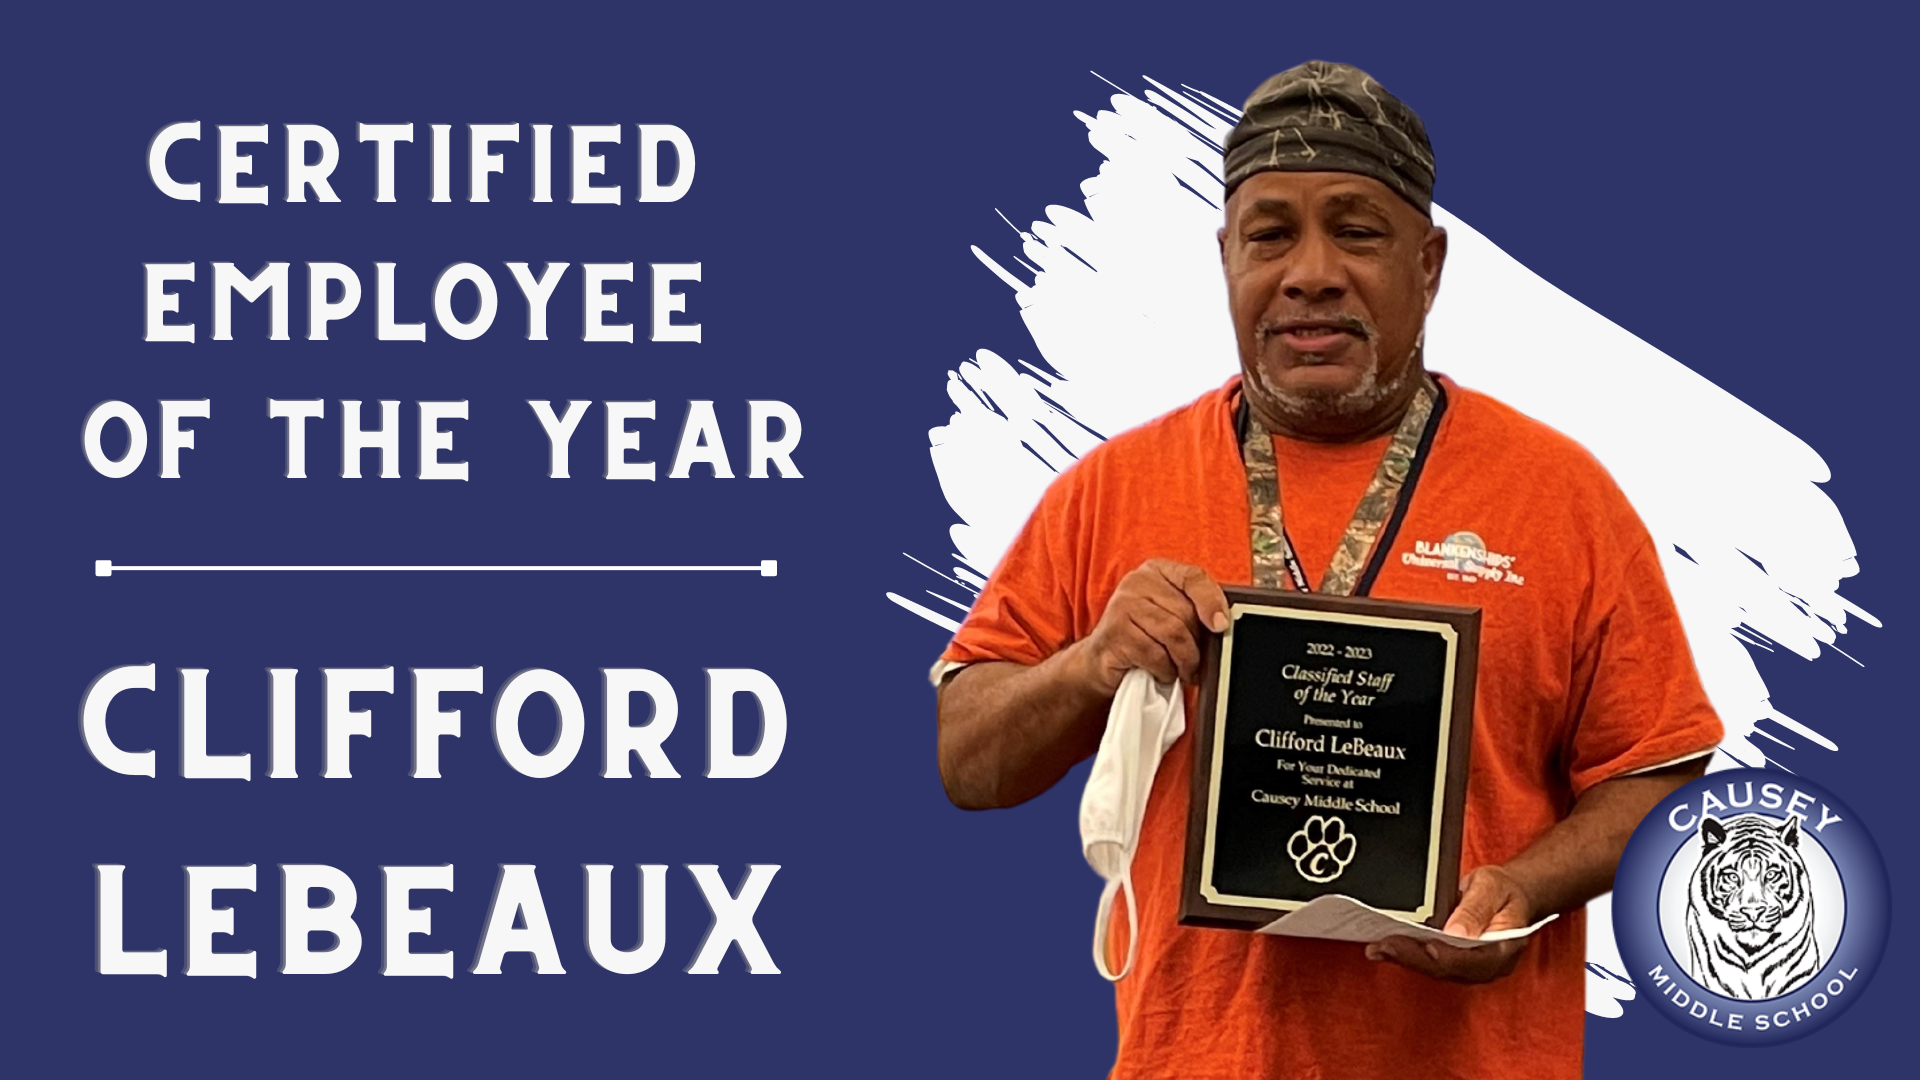 Causey Certified Employee of the Year: Mr. Lebeaux